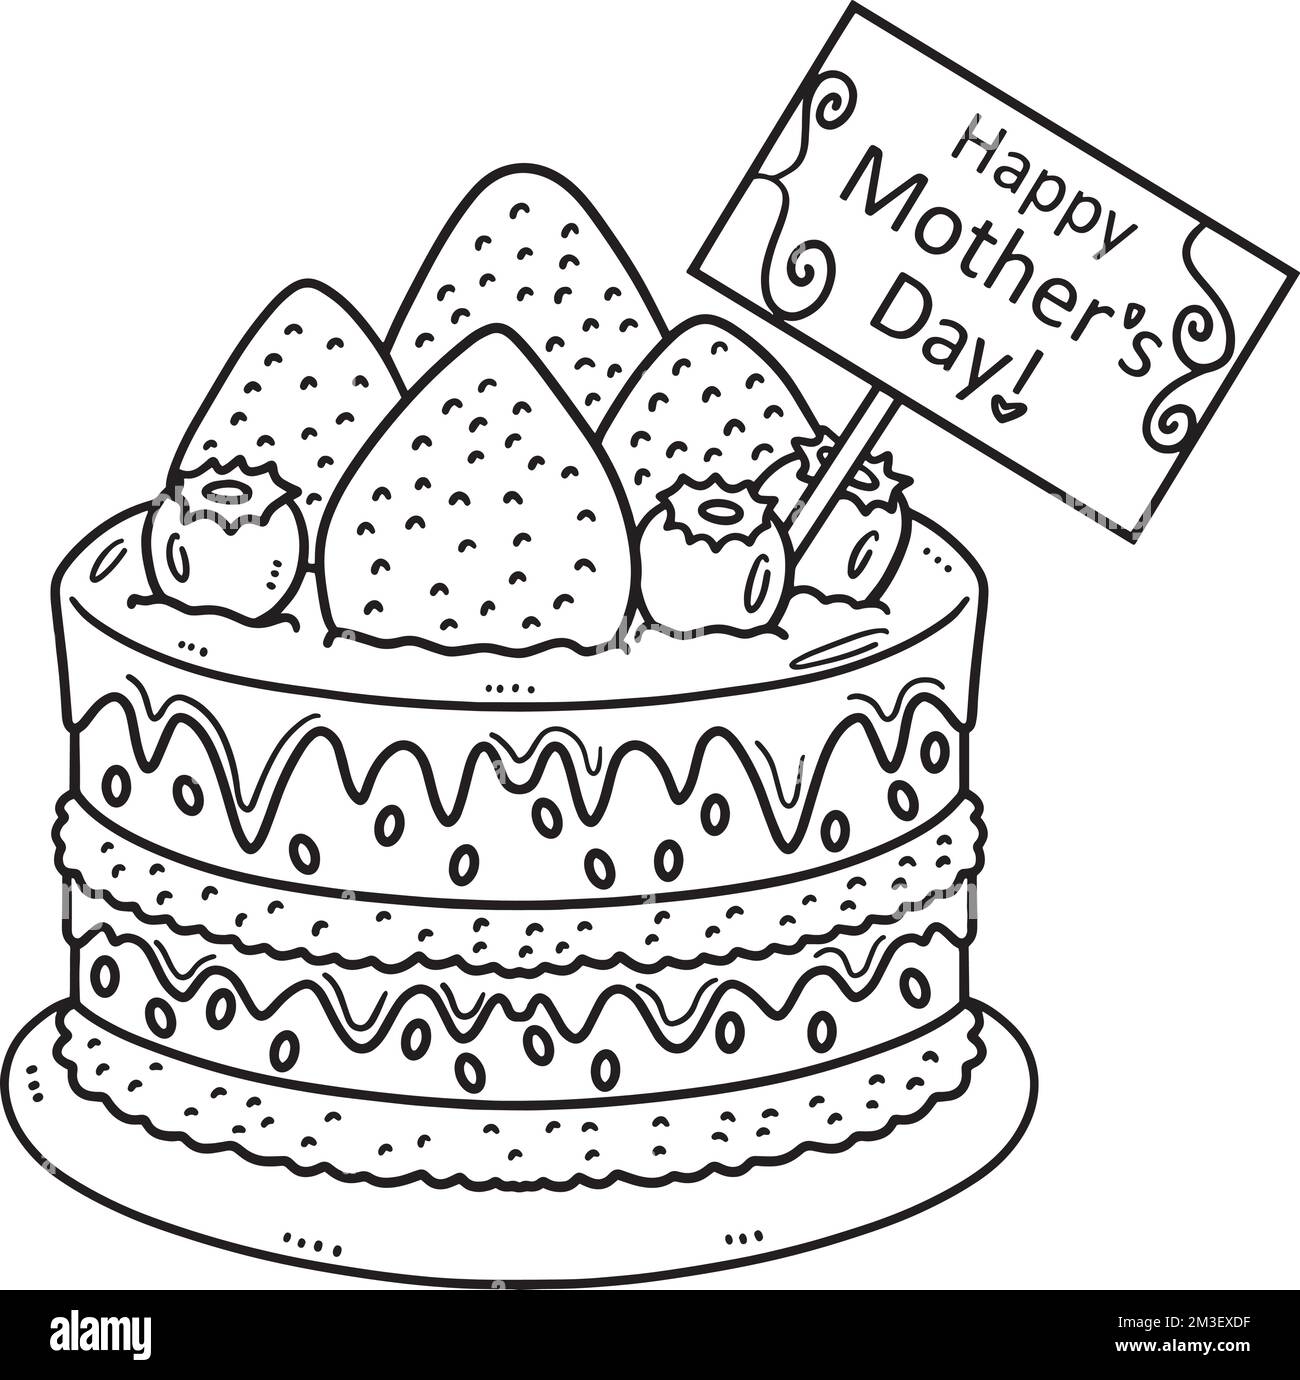 Mothers Day Cake Isolated Coloring Page for Kids Stock Vector